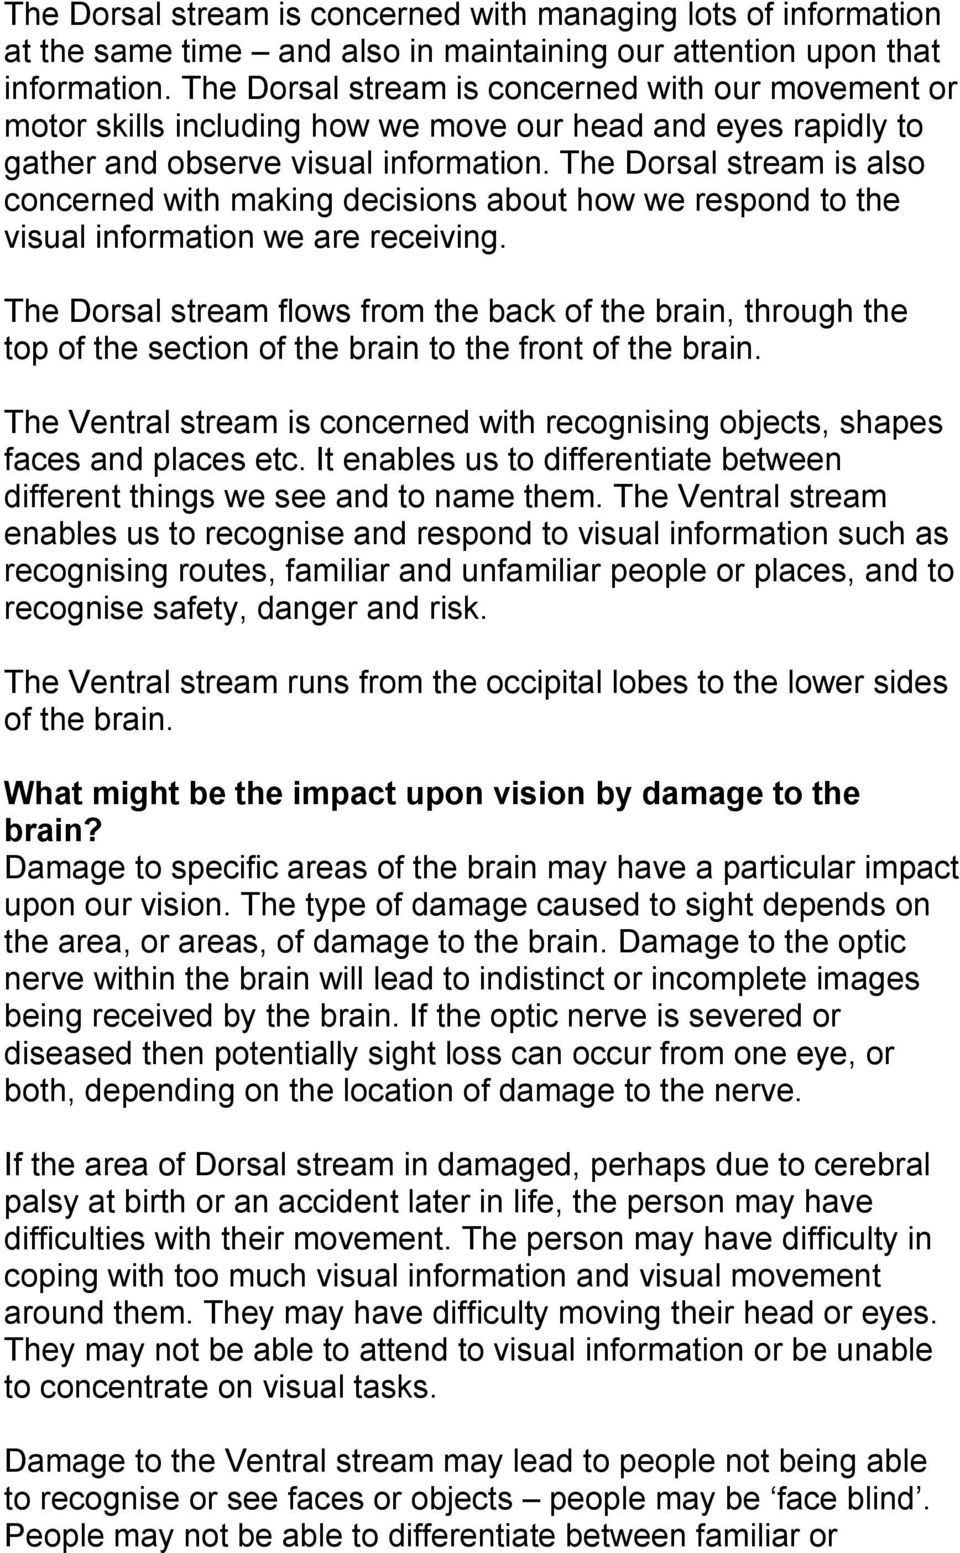 The Dorsal stream is also concerned with making decisions about how we respond to the visual information we are receiving.